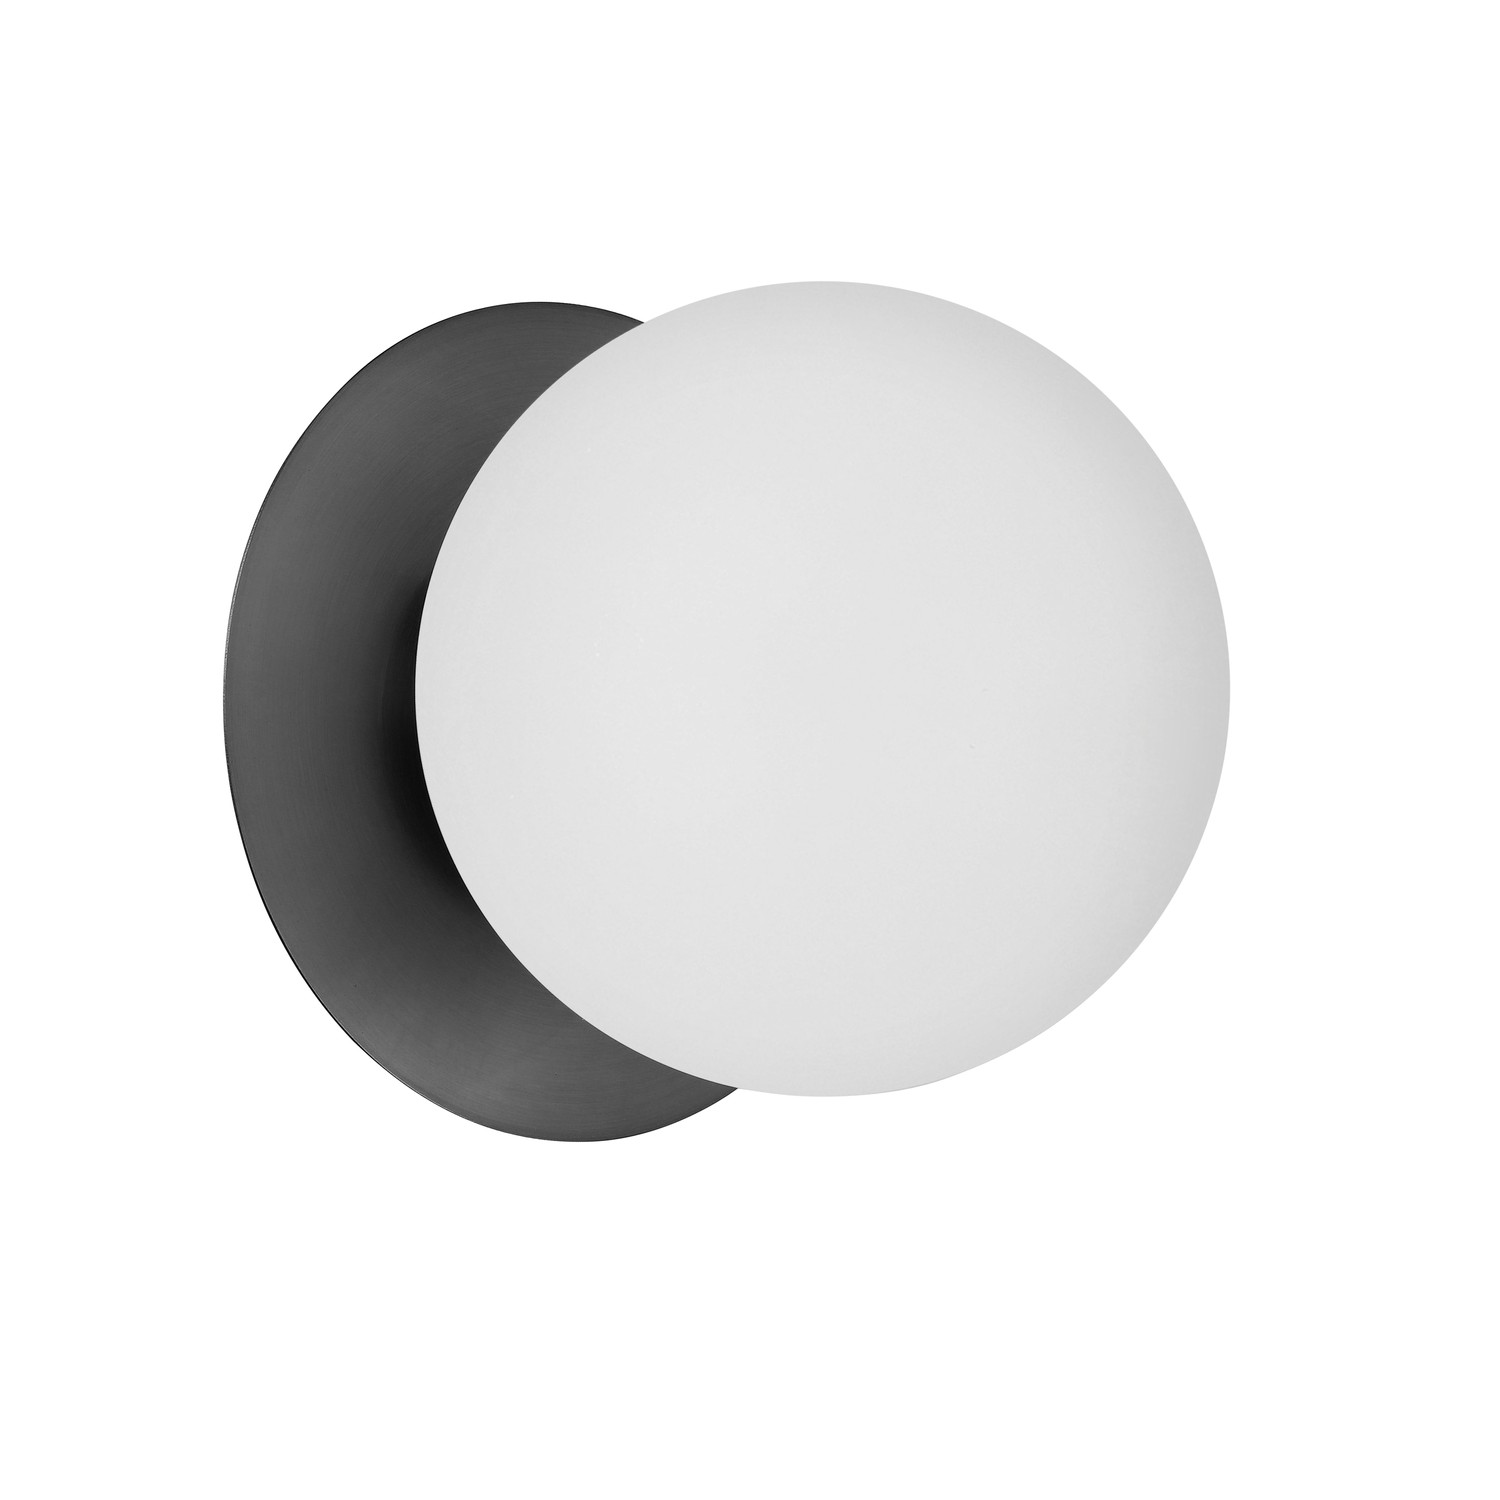 1 Light Incandescent Wall Sconce, Matte Black with White Glass